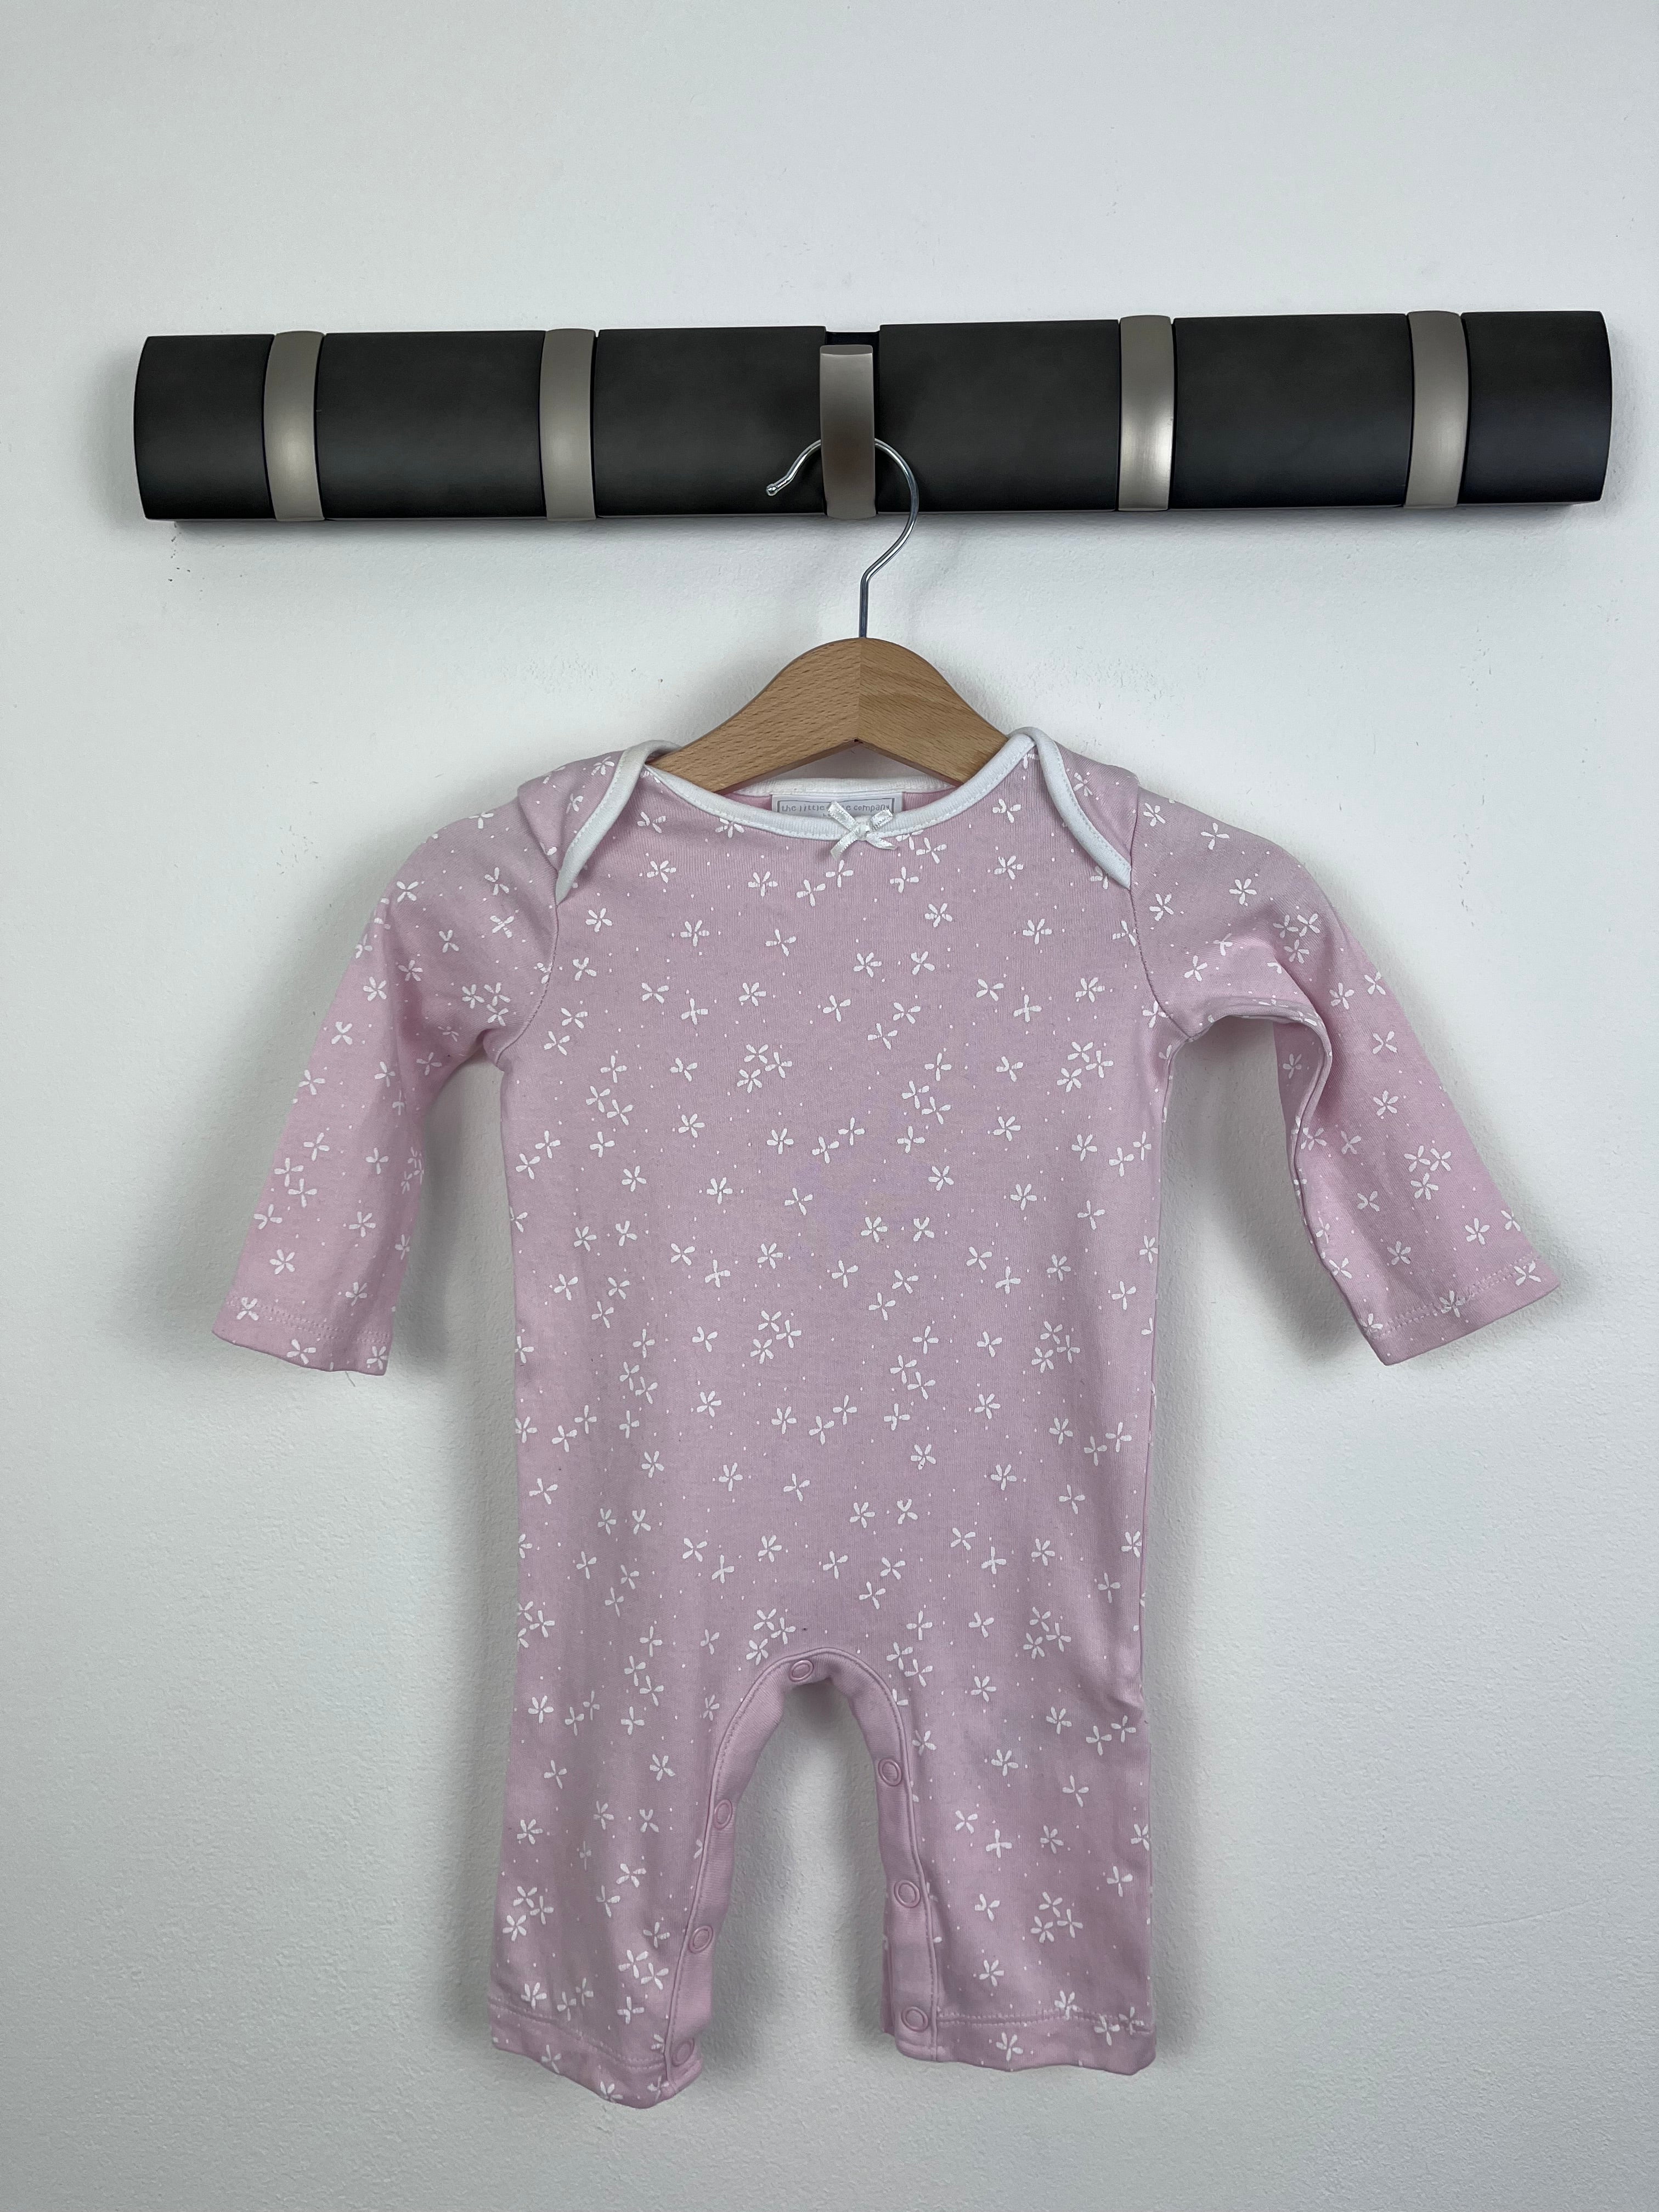 The Little White Company 0-3 Months-Rompers-Second Snuggle Preloved